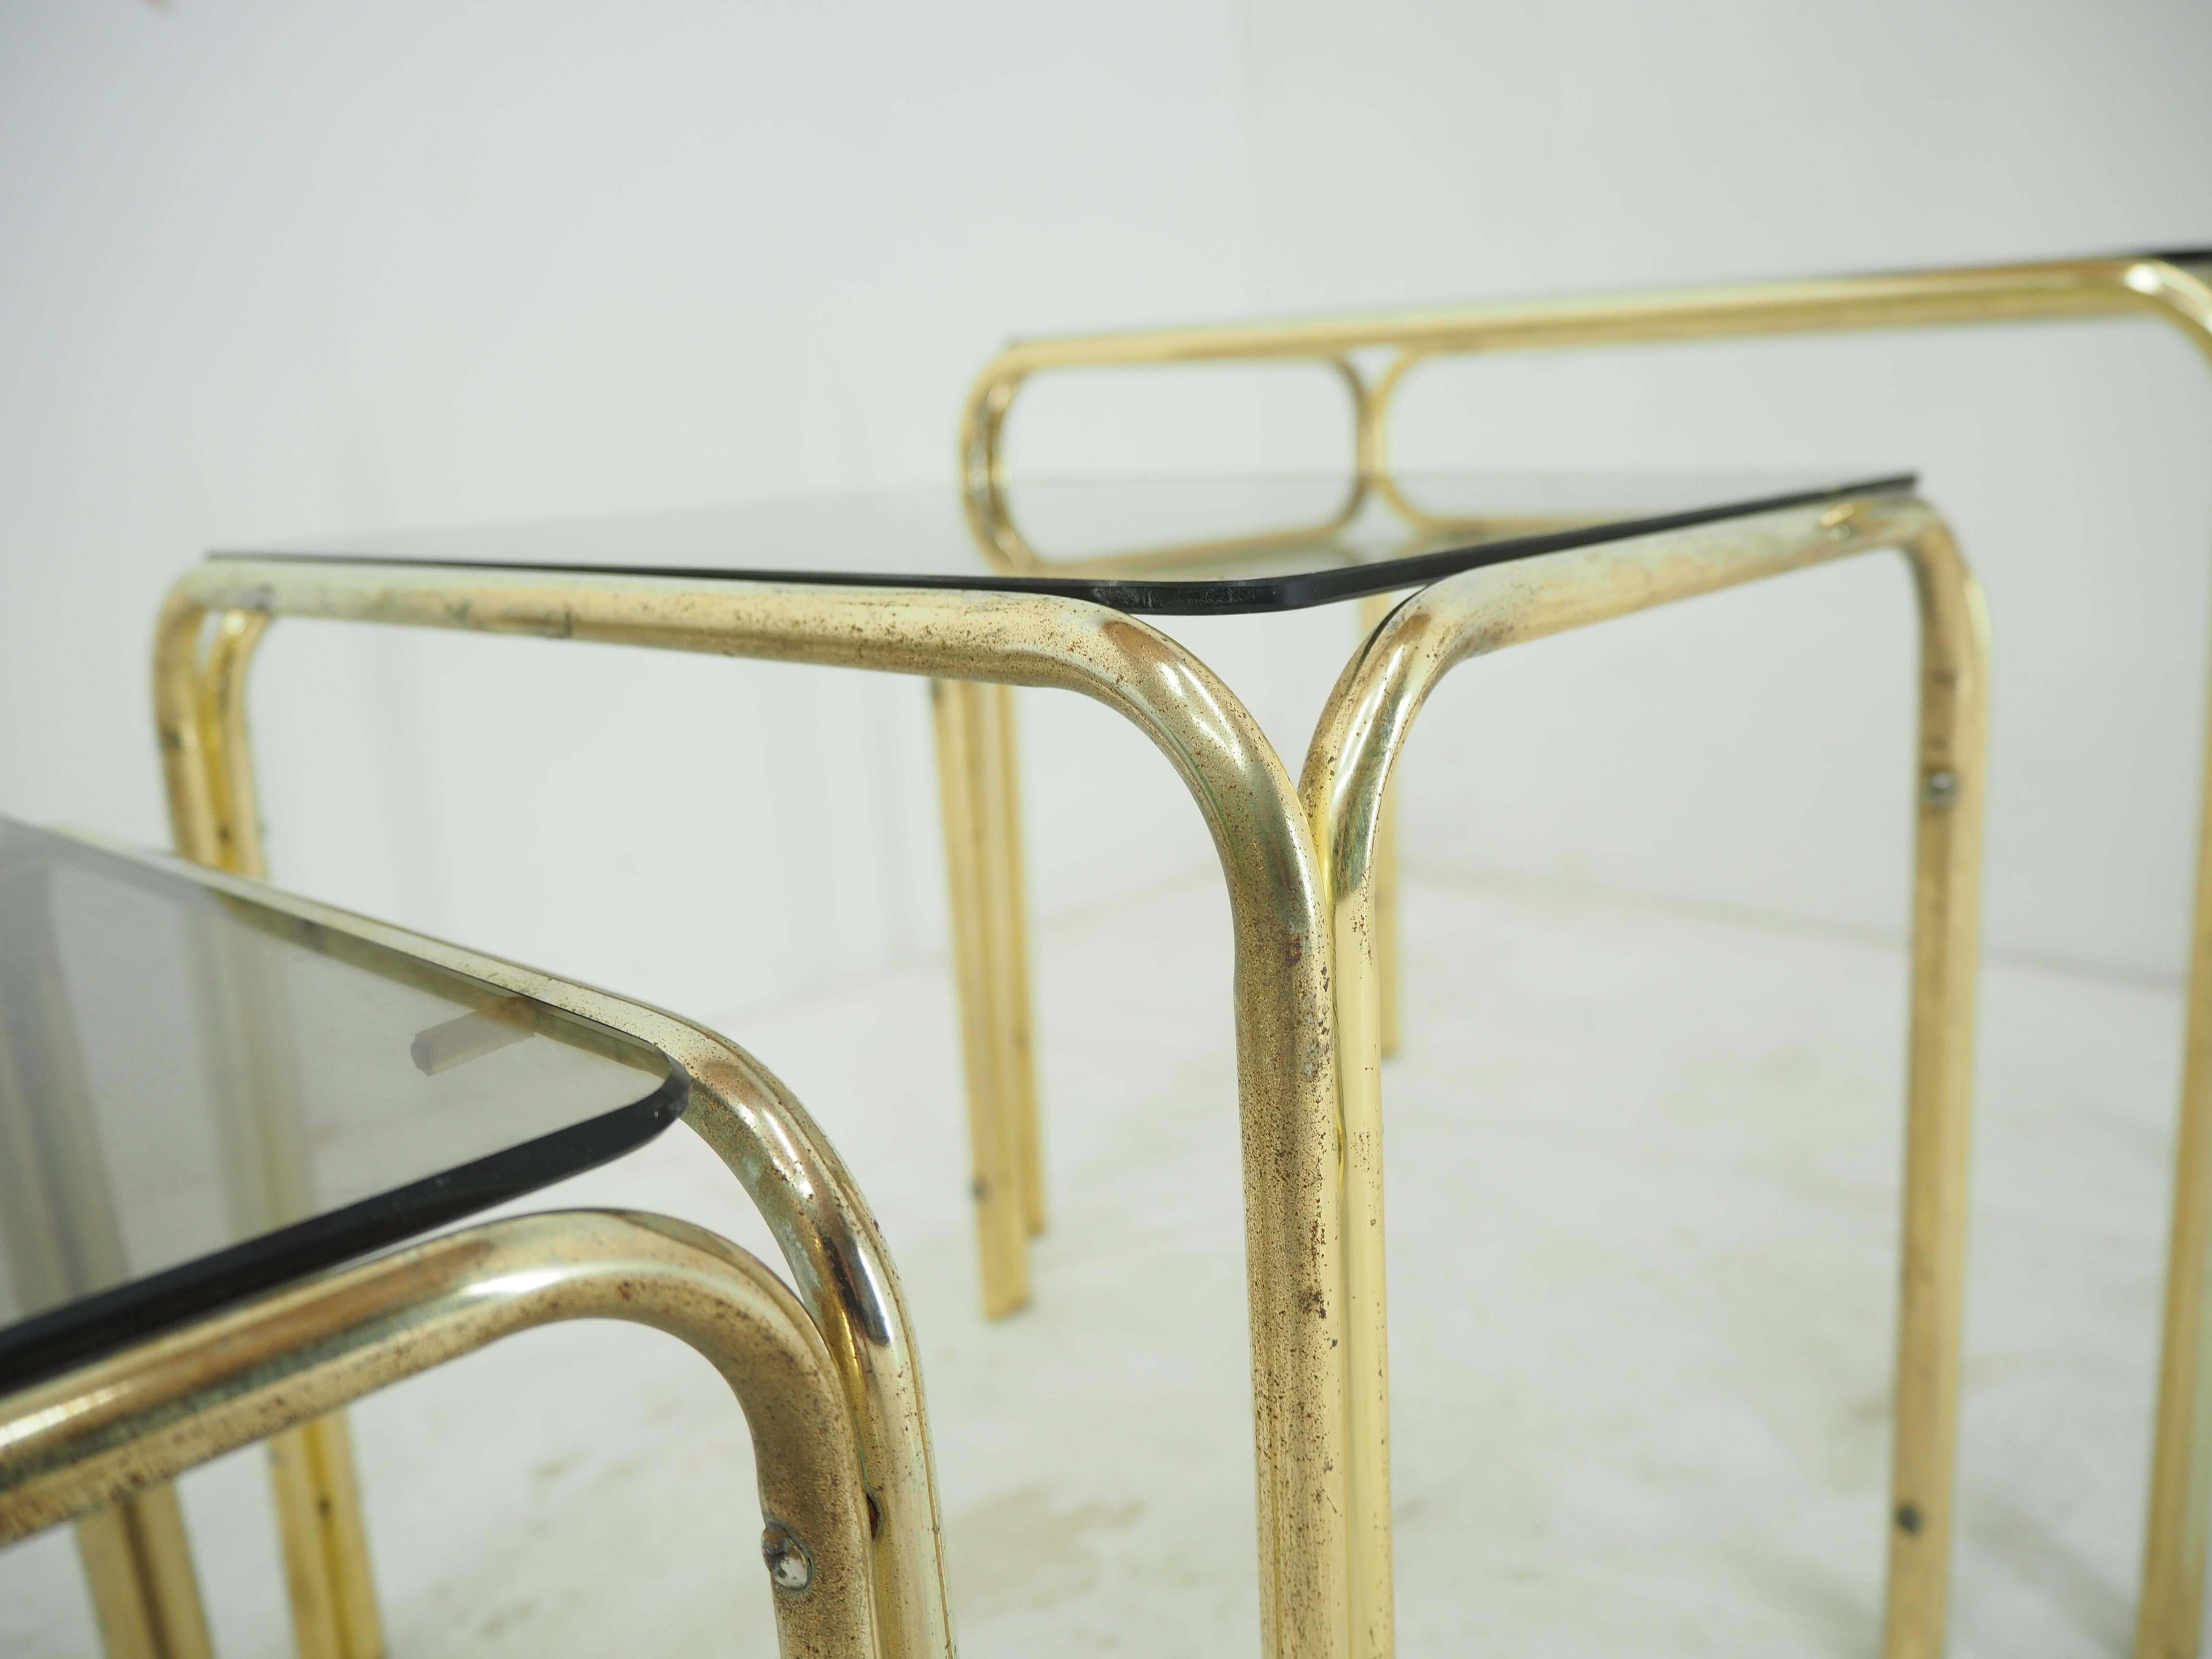 Midcentury Brass & Smoked Glass Nesting Tables, 1970s For Sale 1